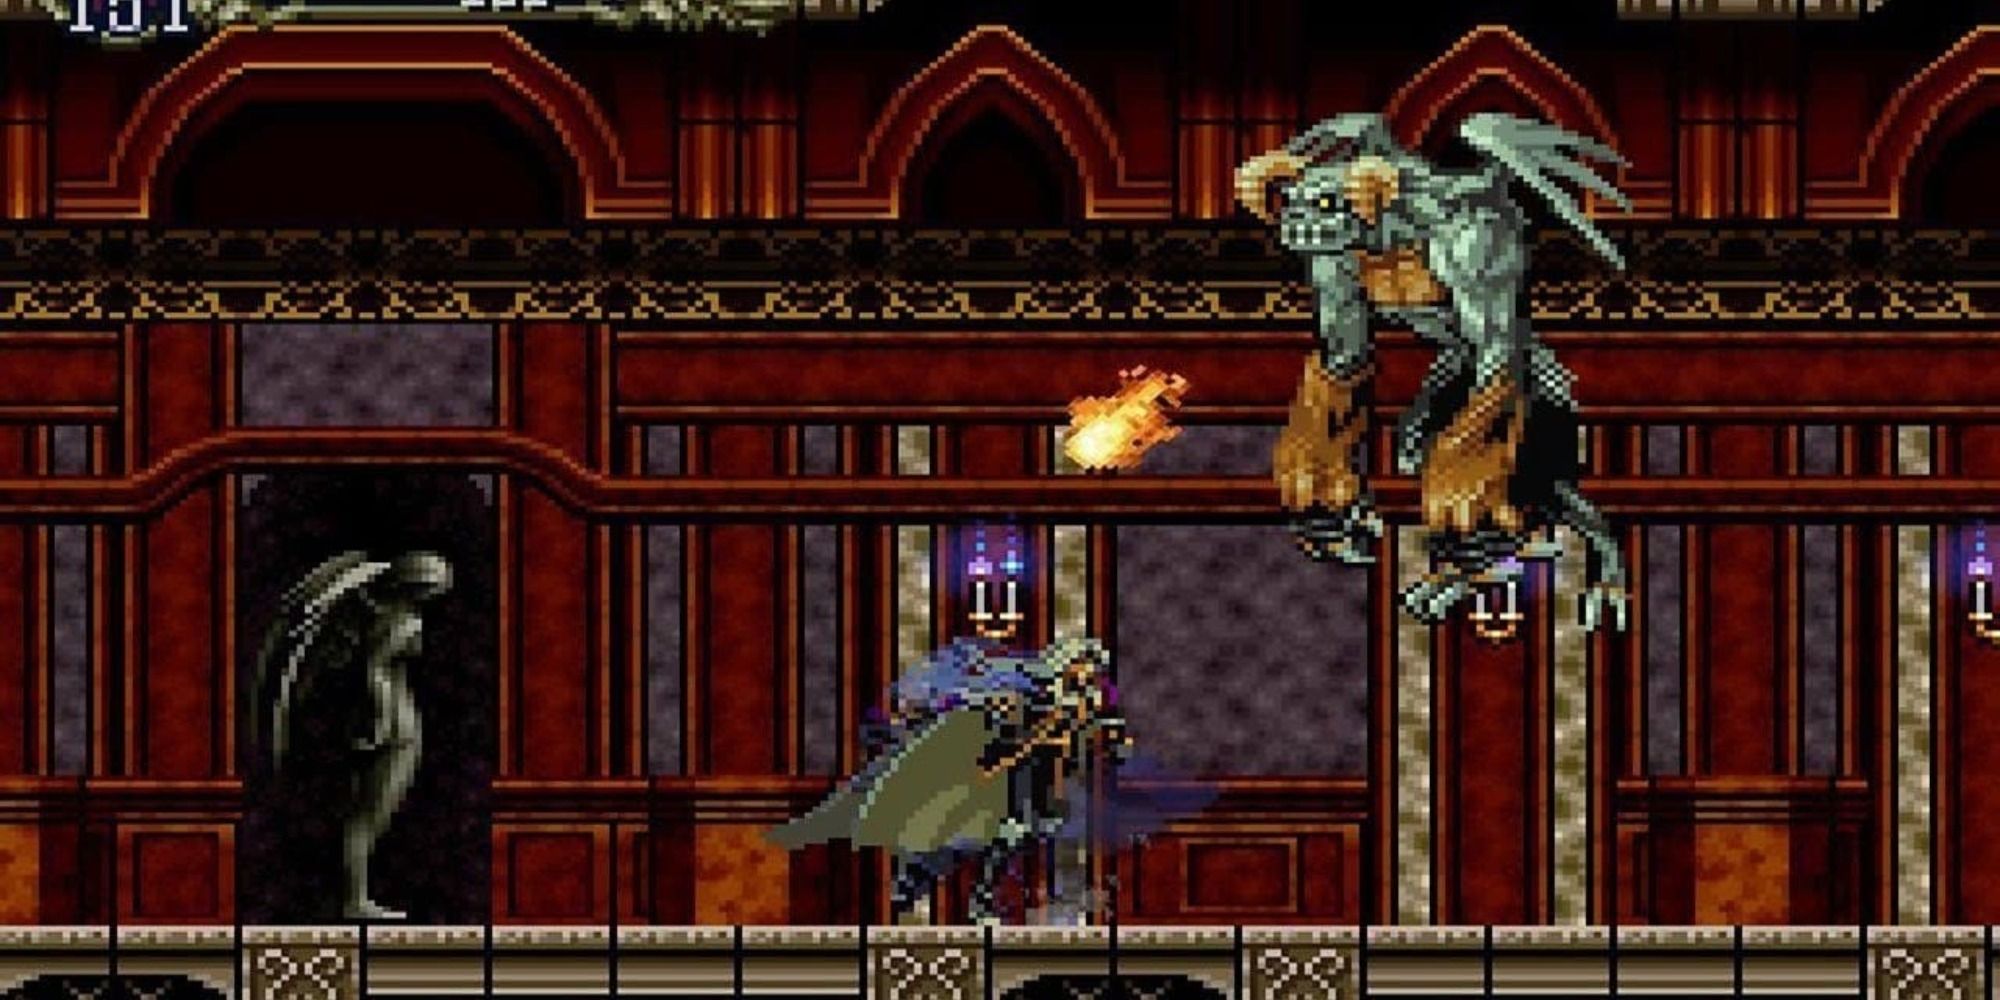 An image of Alucard fighting a gargoyle-like creature in Castlevania Symphony of the Night